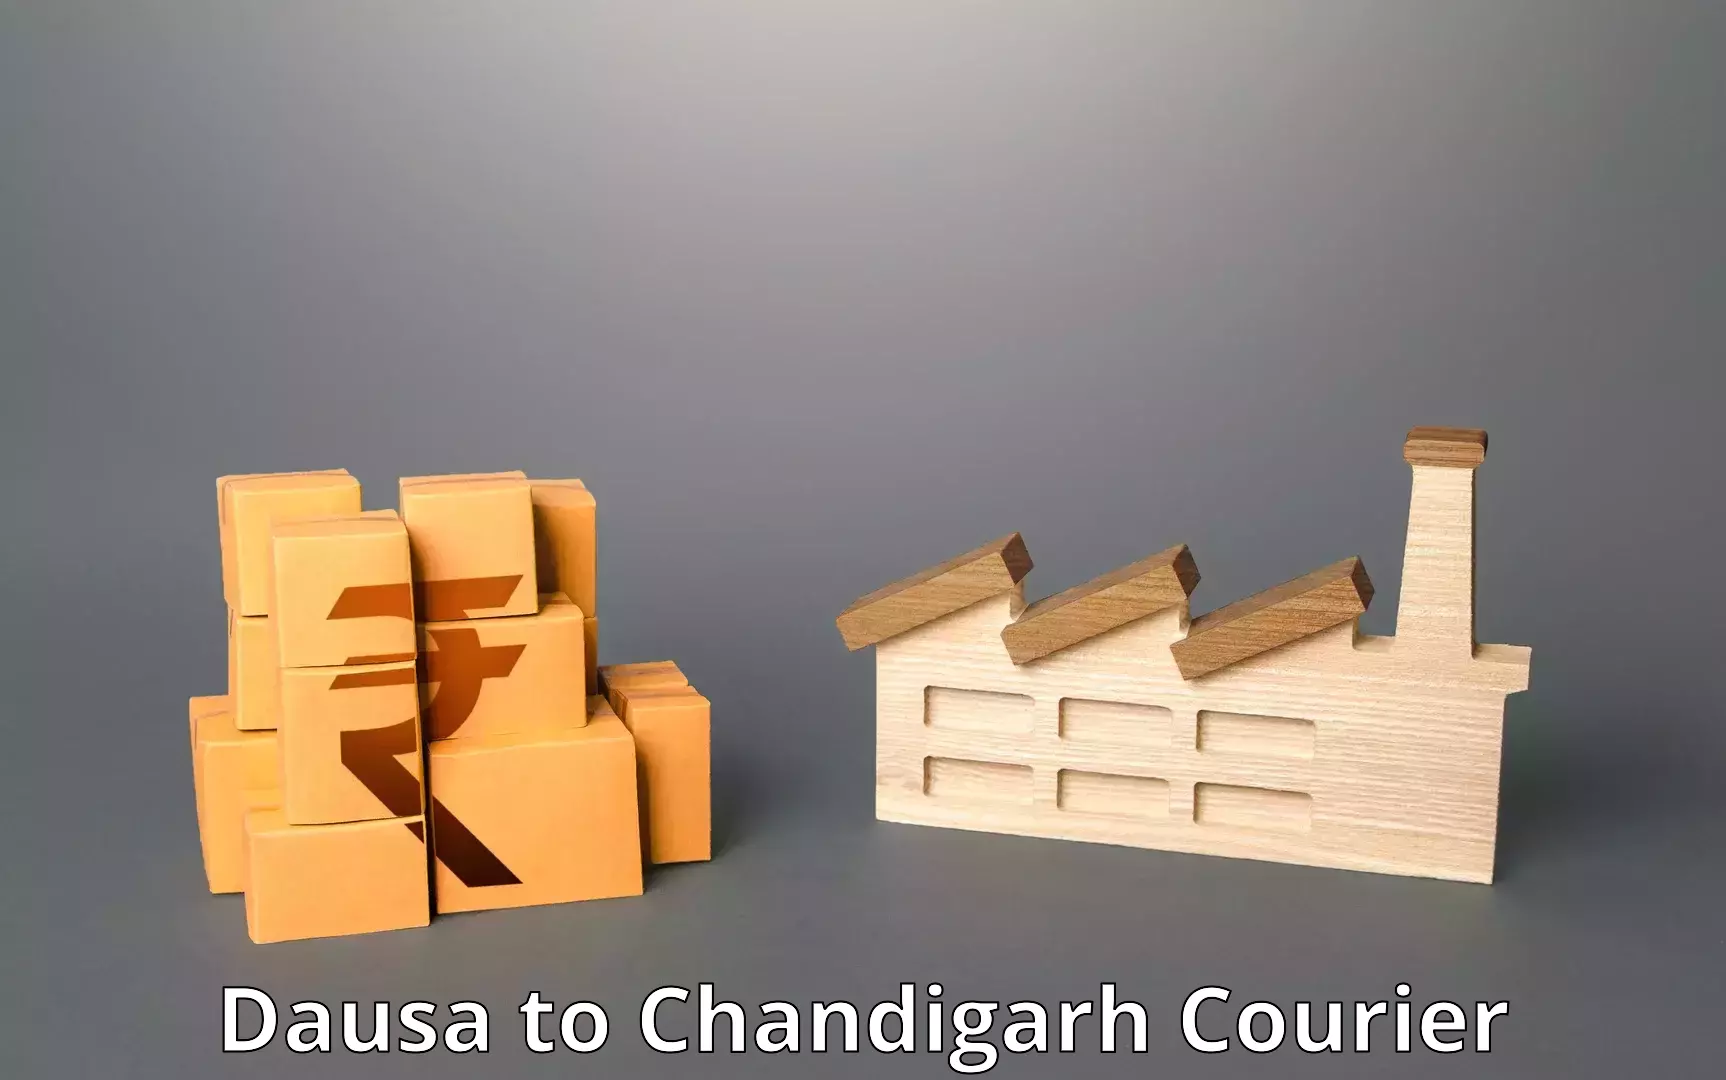 Seamless shipping experience Dausa to Chandigarh